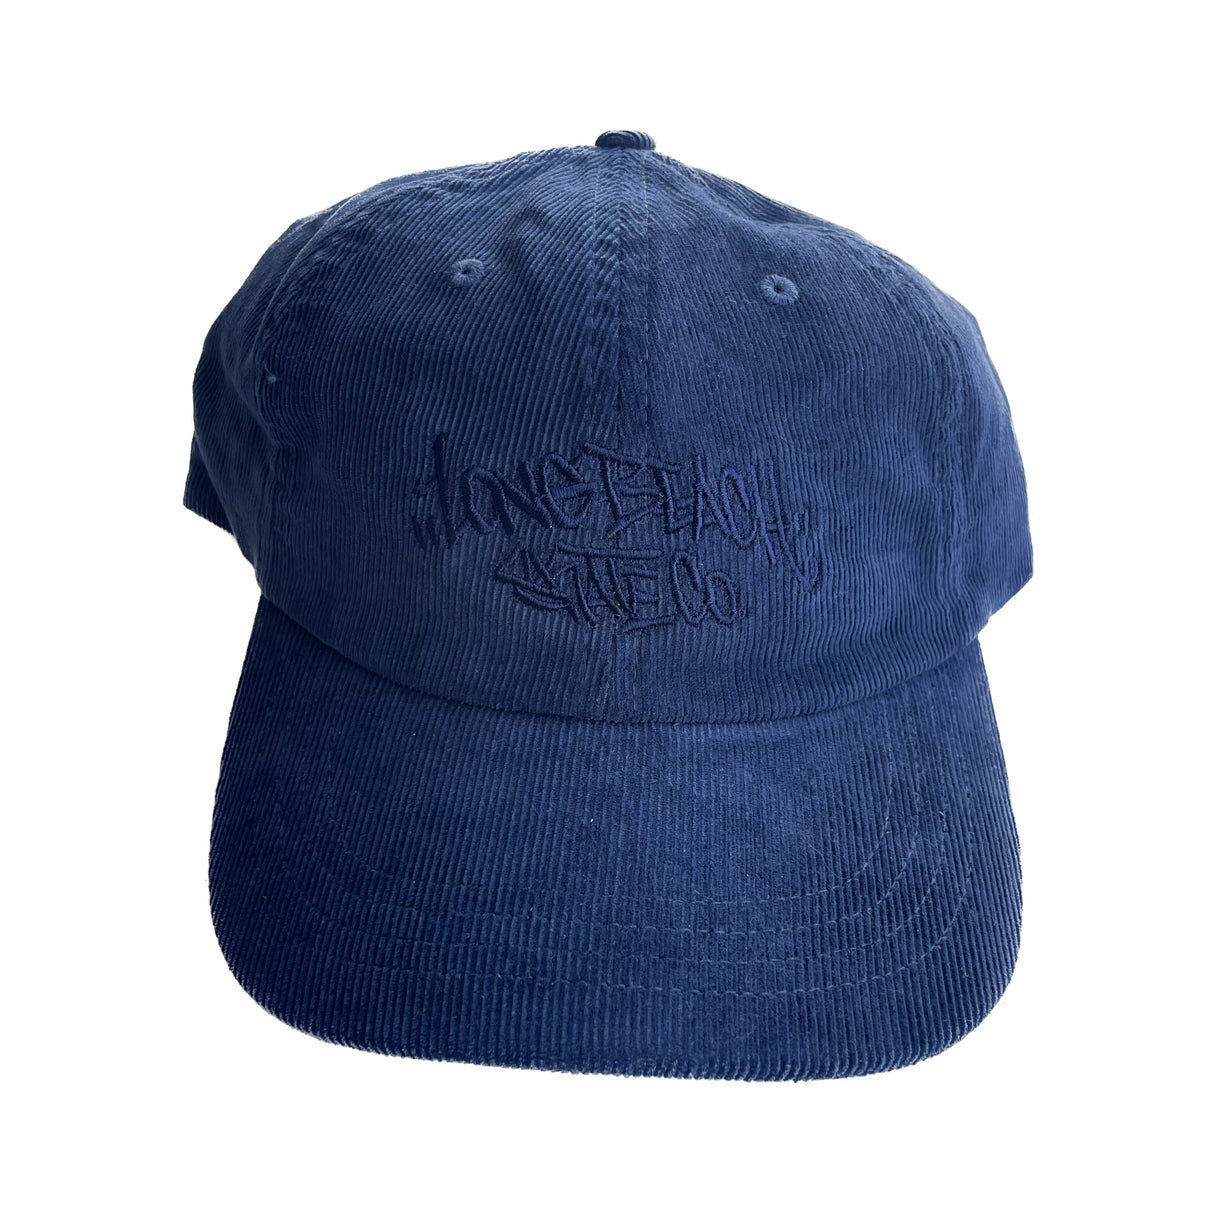 Long Beach Skate Co. Graffiti LBS Navy Corduroy Unstructured Dad Strapback Hat